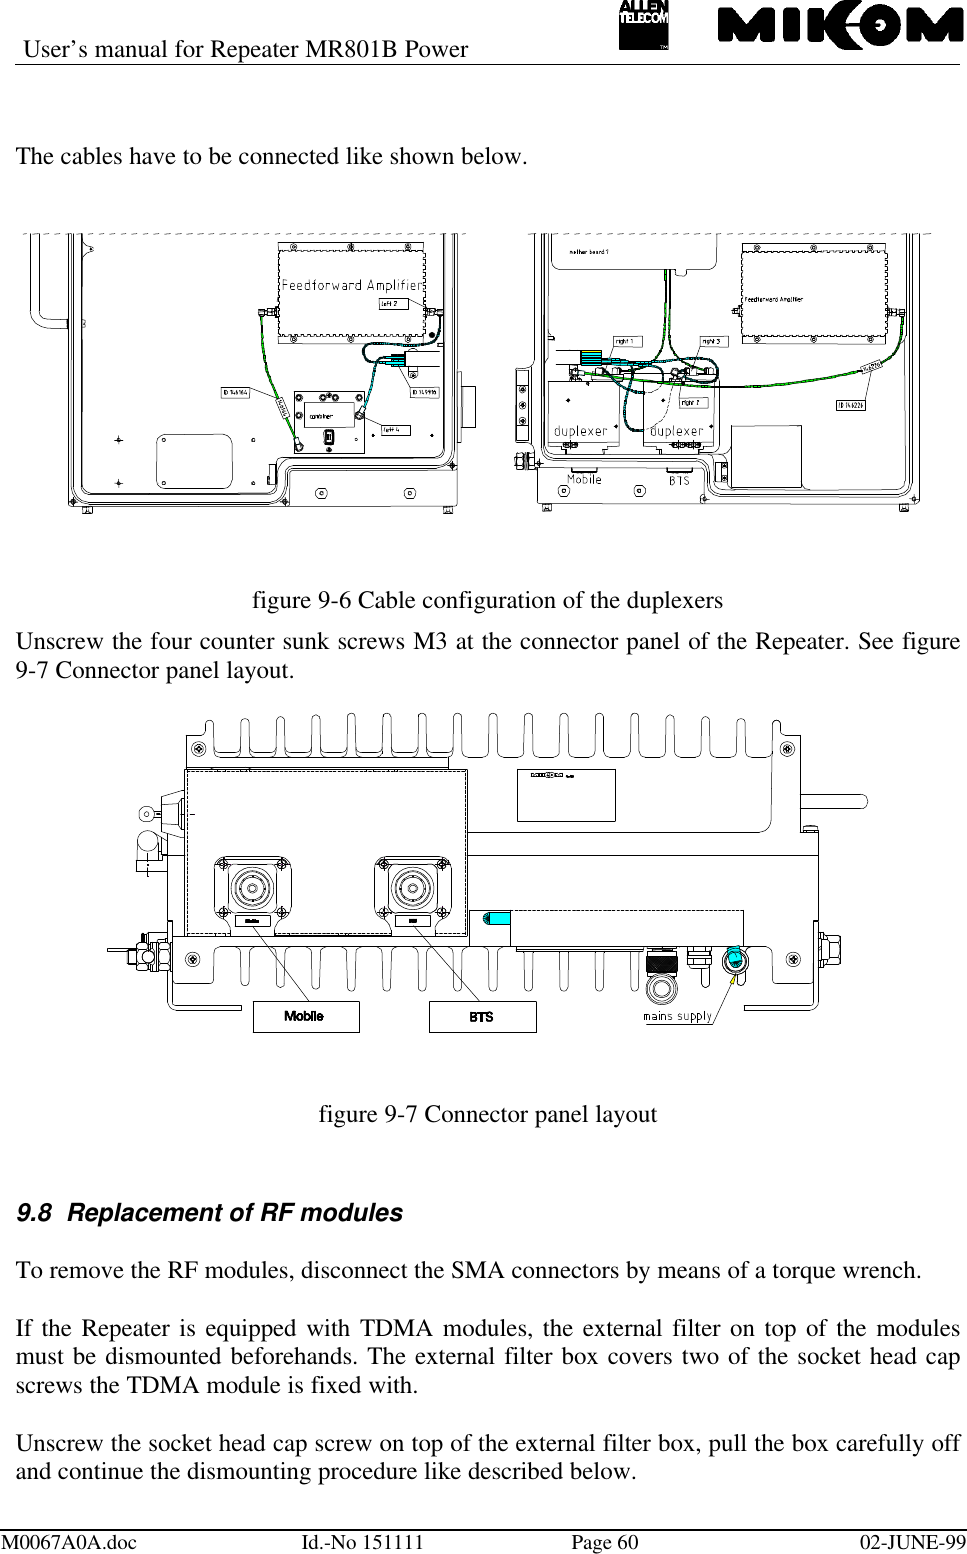 User’s manual for Repeater MR801B PowerM0067A0A.doc Id.-No 151111 Page 60 02-JUNE-99The cables have to be connected like shown below.figure 9-6 Cable configuration of the duplexersUnscrew the four counter sunk screws M3 at the connector panel of the Repeater. See figure9-7 Connector panel layout.figure 9-7 Connector panel layout9.8 Replacement of RF modulesTo remove the RF modules, disconnect the SMA connectors by means of a torque wrench.If the Repeater is equipped with TDMA modules, the external filter on top of the modulesmust be dismounted beforehands. The external filter box covers two of the socket head capscrews the TDMA module is fixed with.Unscrew the socket head cap screw on top of the external filter box, pull the box carefully offand continue the dismounting procedure like described below.